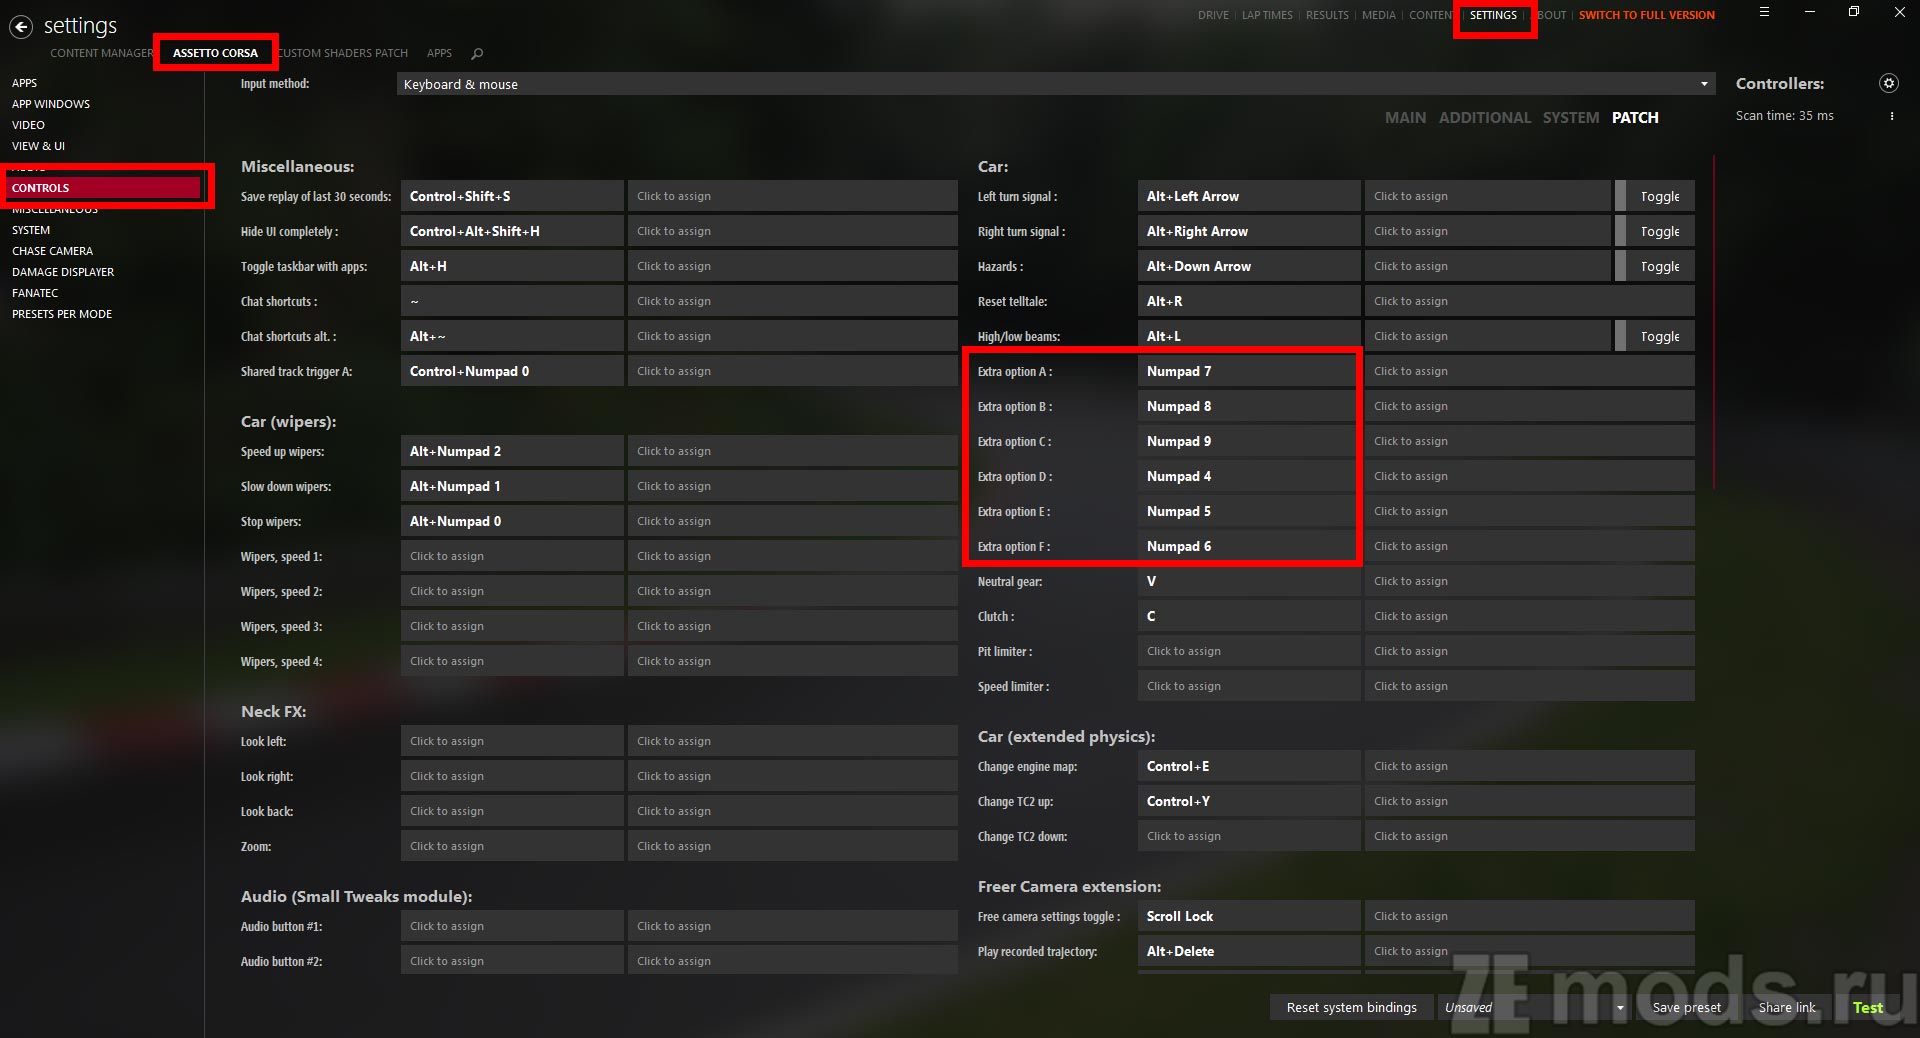 How to enable Extra in Assetto Corsa